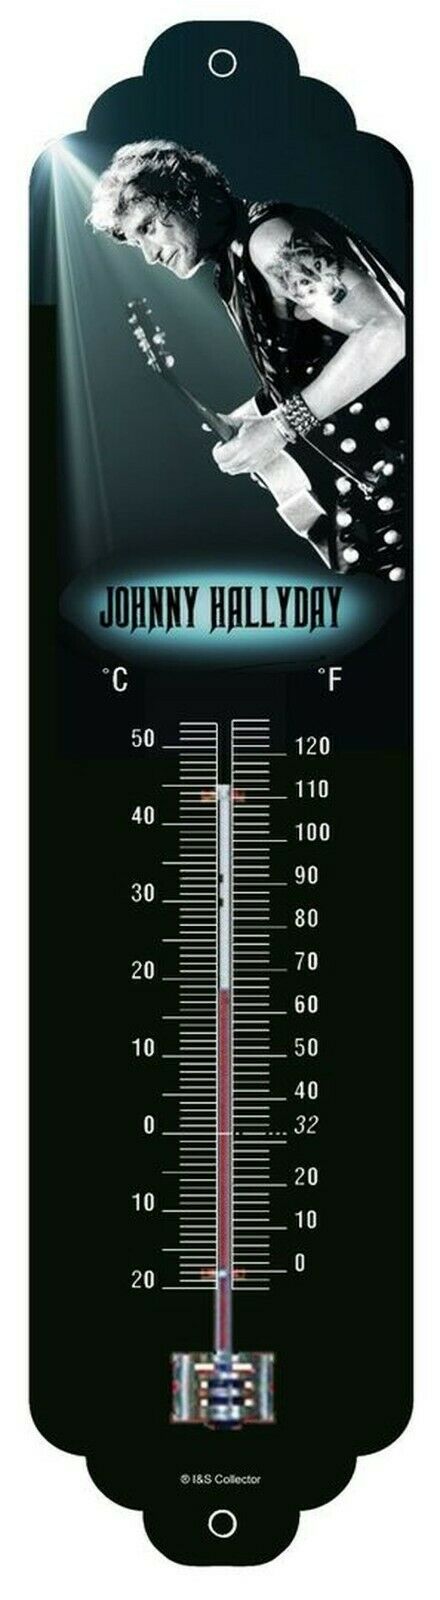 thermometre-johnny-hallyday-metal-officiel